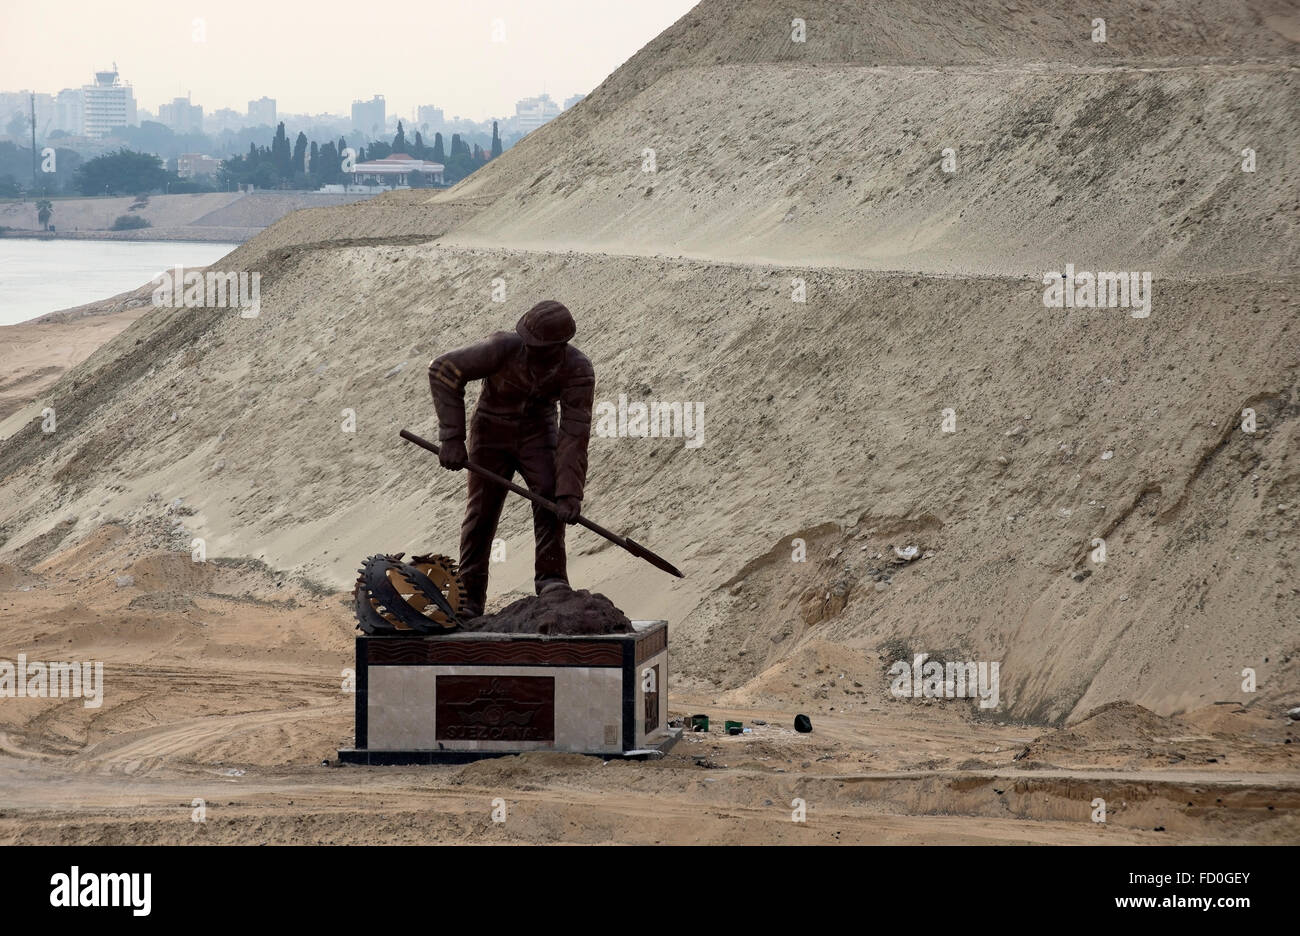 Statue of an Egyptian labourer at work digging in the sand in the Suez Canal, North Africa. Stock Photo